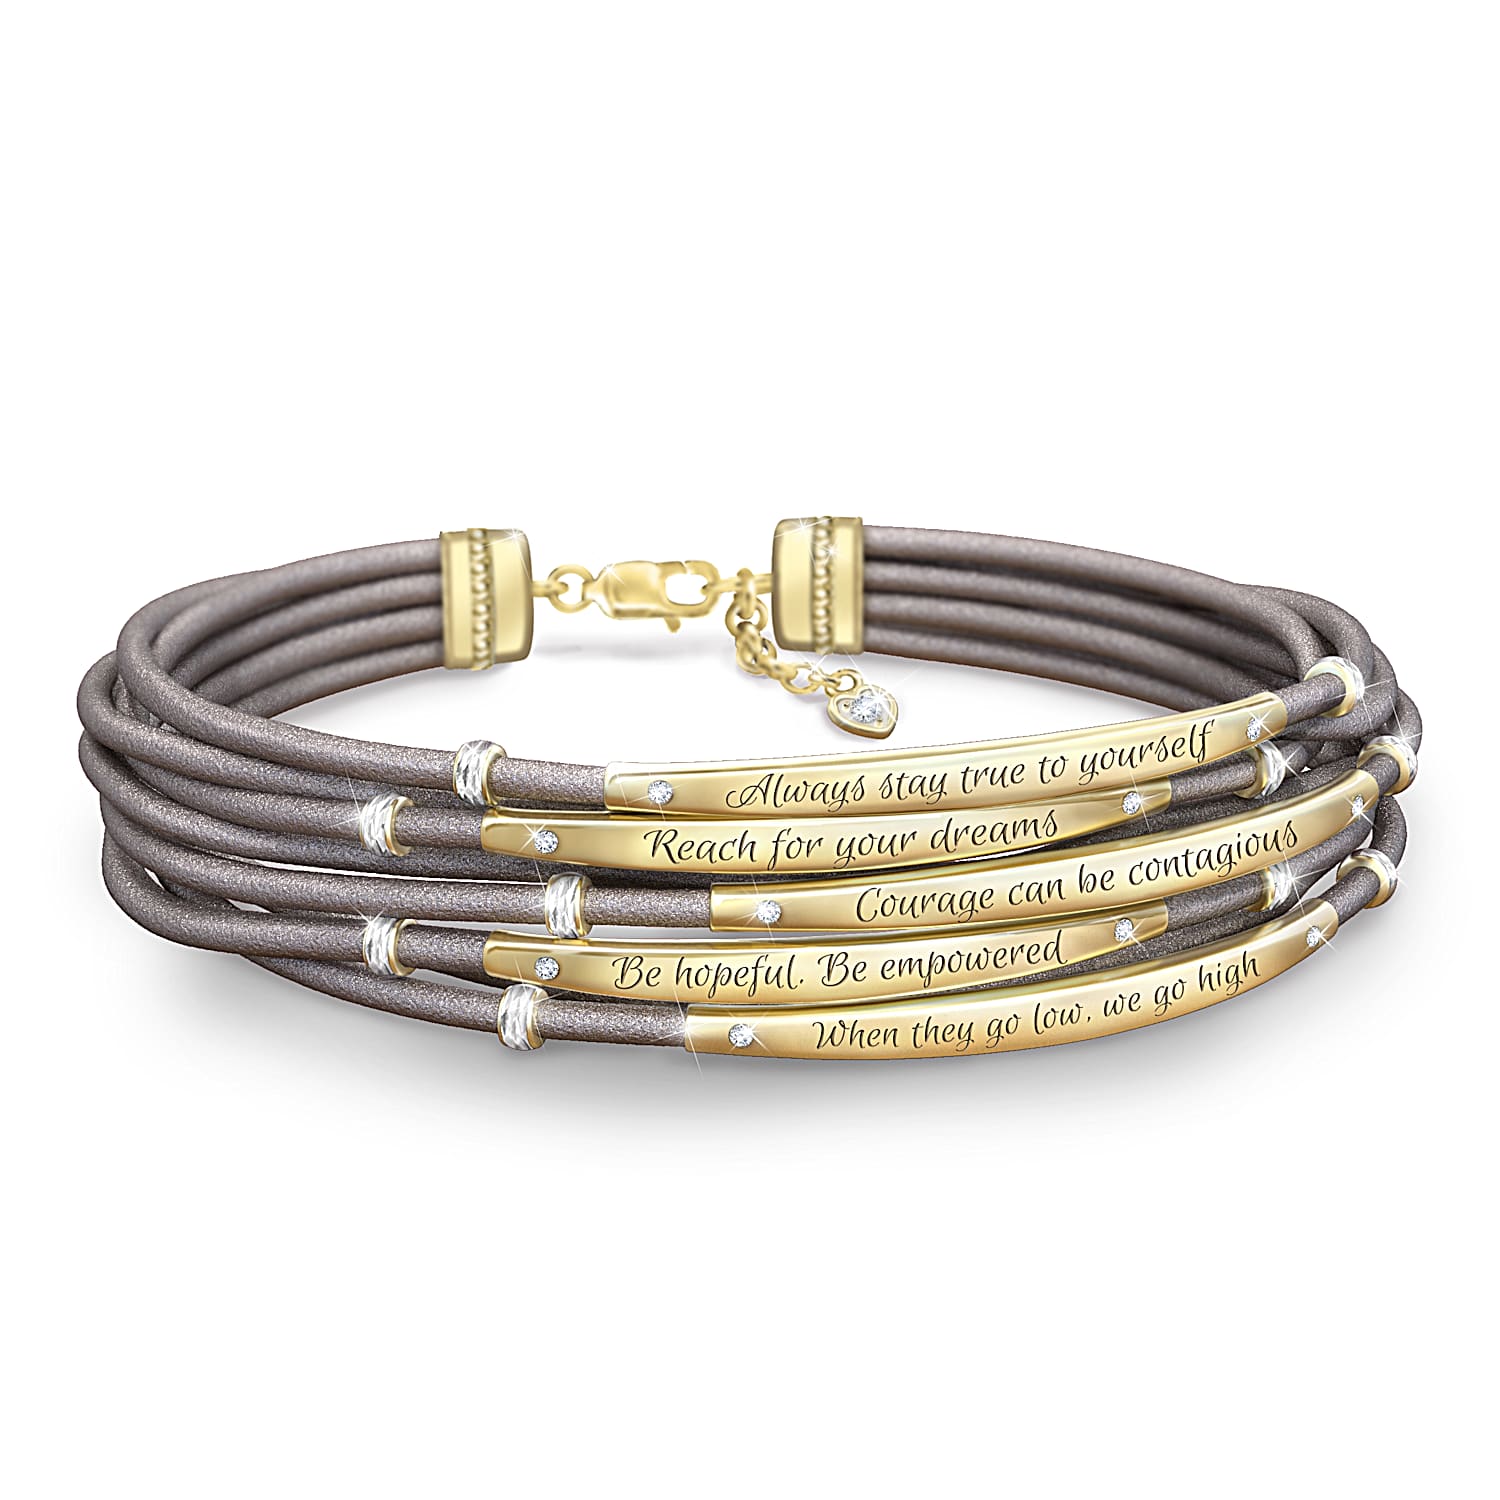 Make a Leather Wrap Bracelet with Metallic Accents